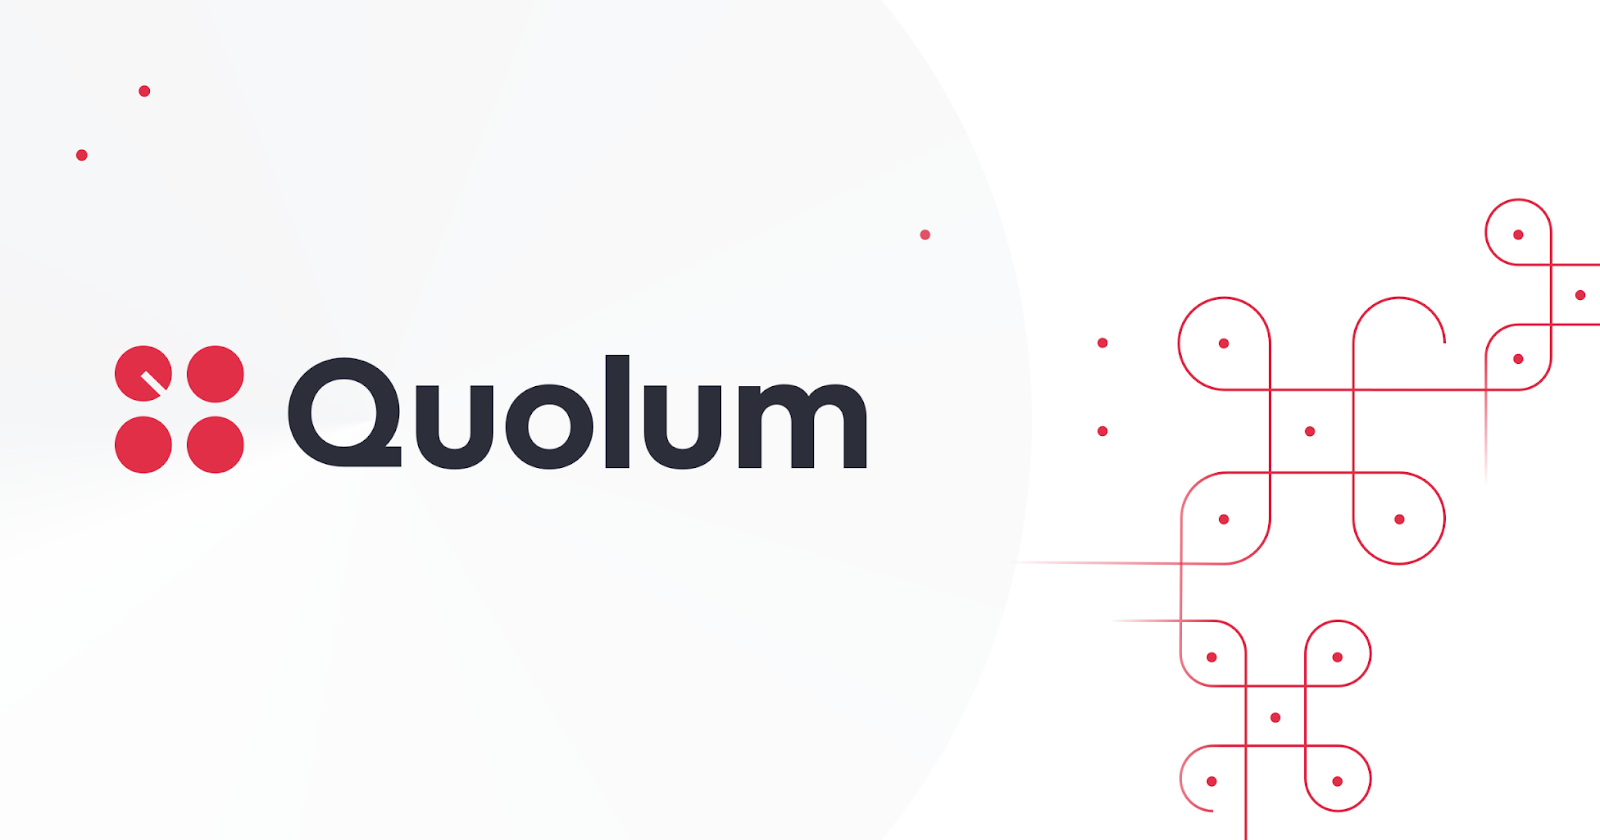 Quolum is one of the best SaaS management platforms on the market.